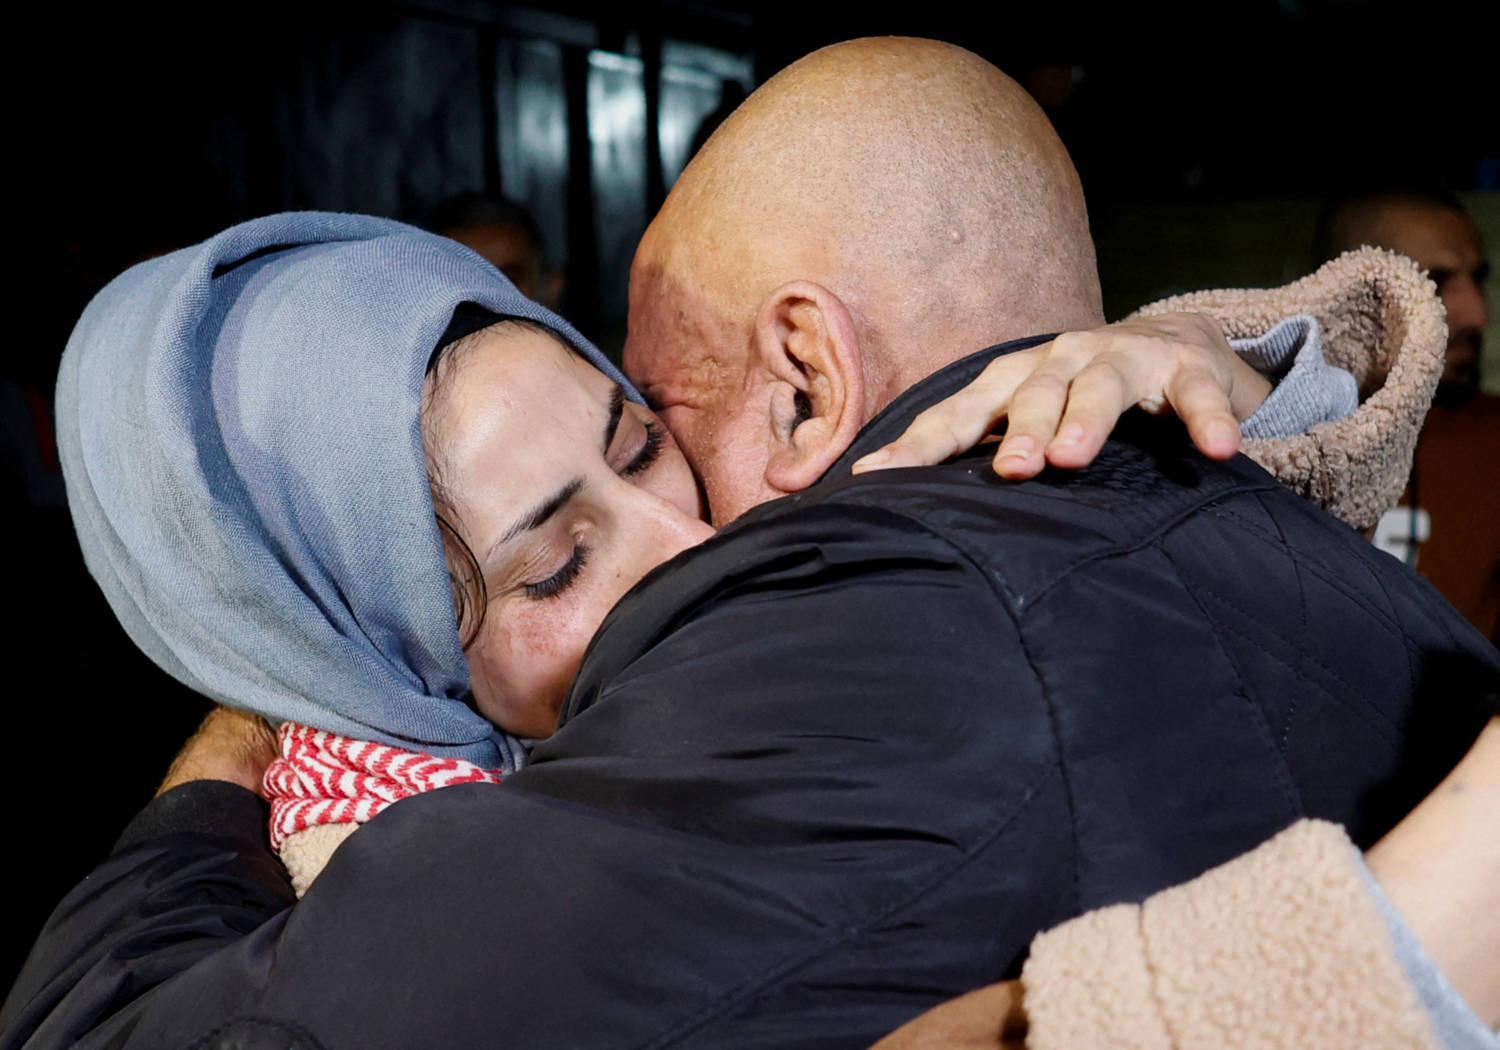 Released Palestinian Prisoner Lamees Abu Arkoob Reacts As She Is Received By Her Family Outside Her House Near Hebron